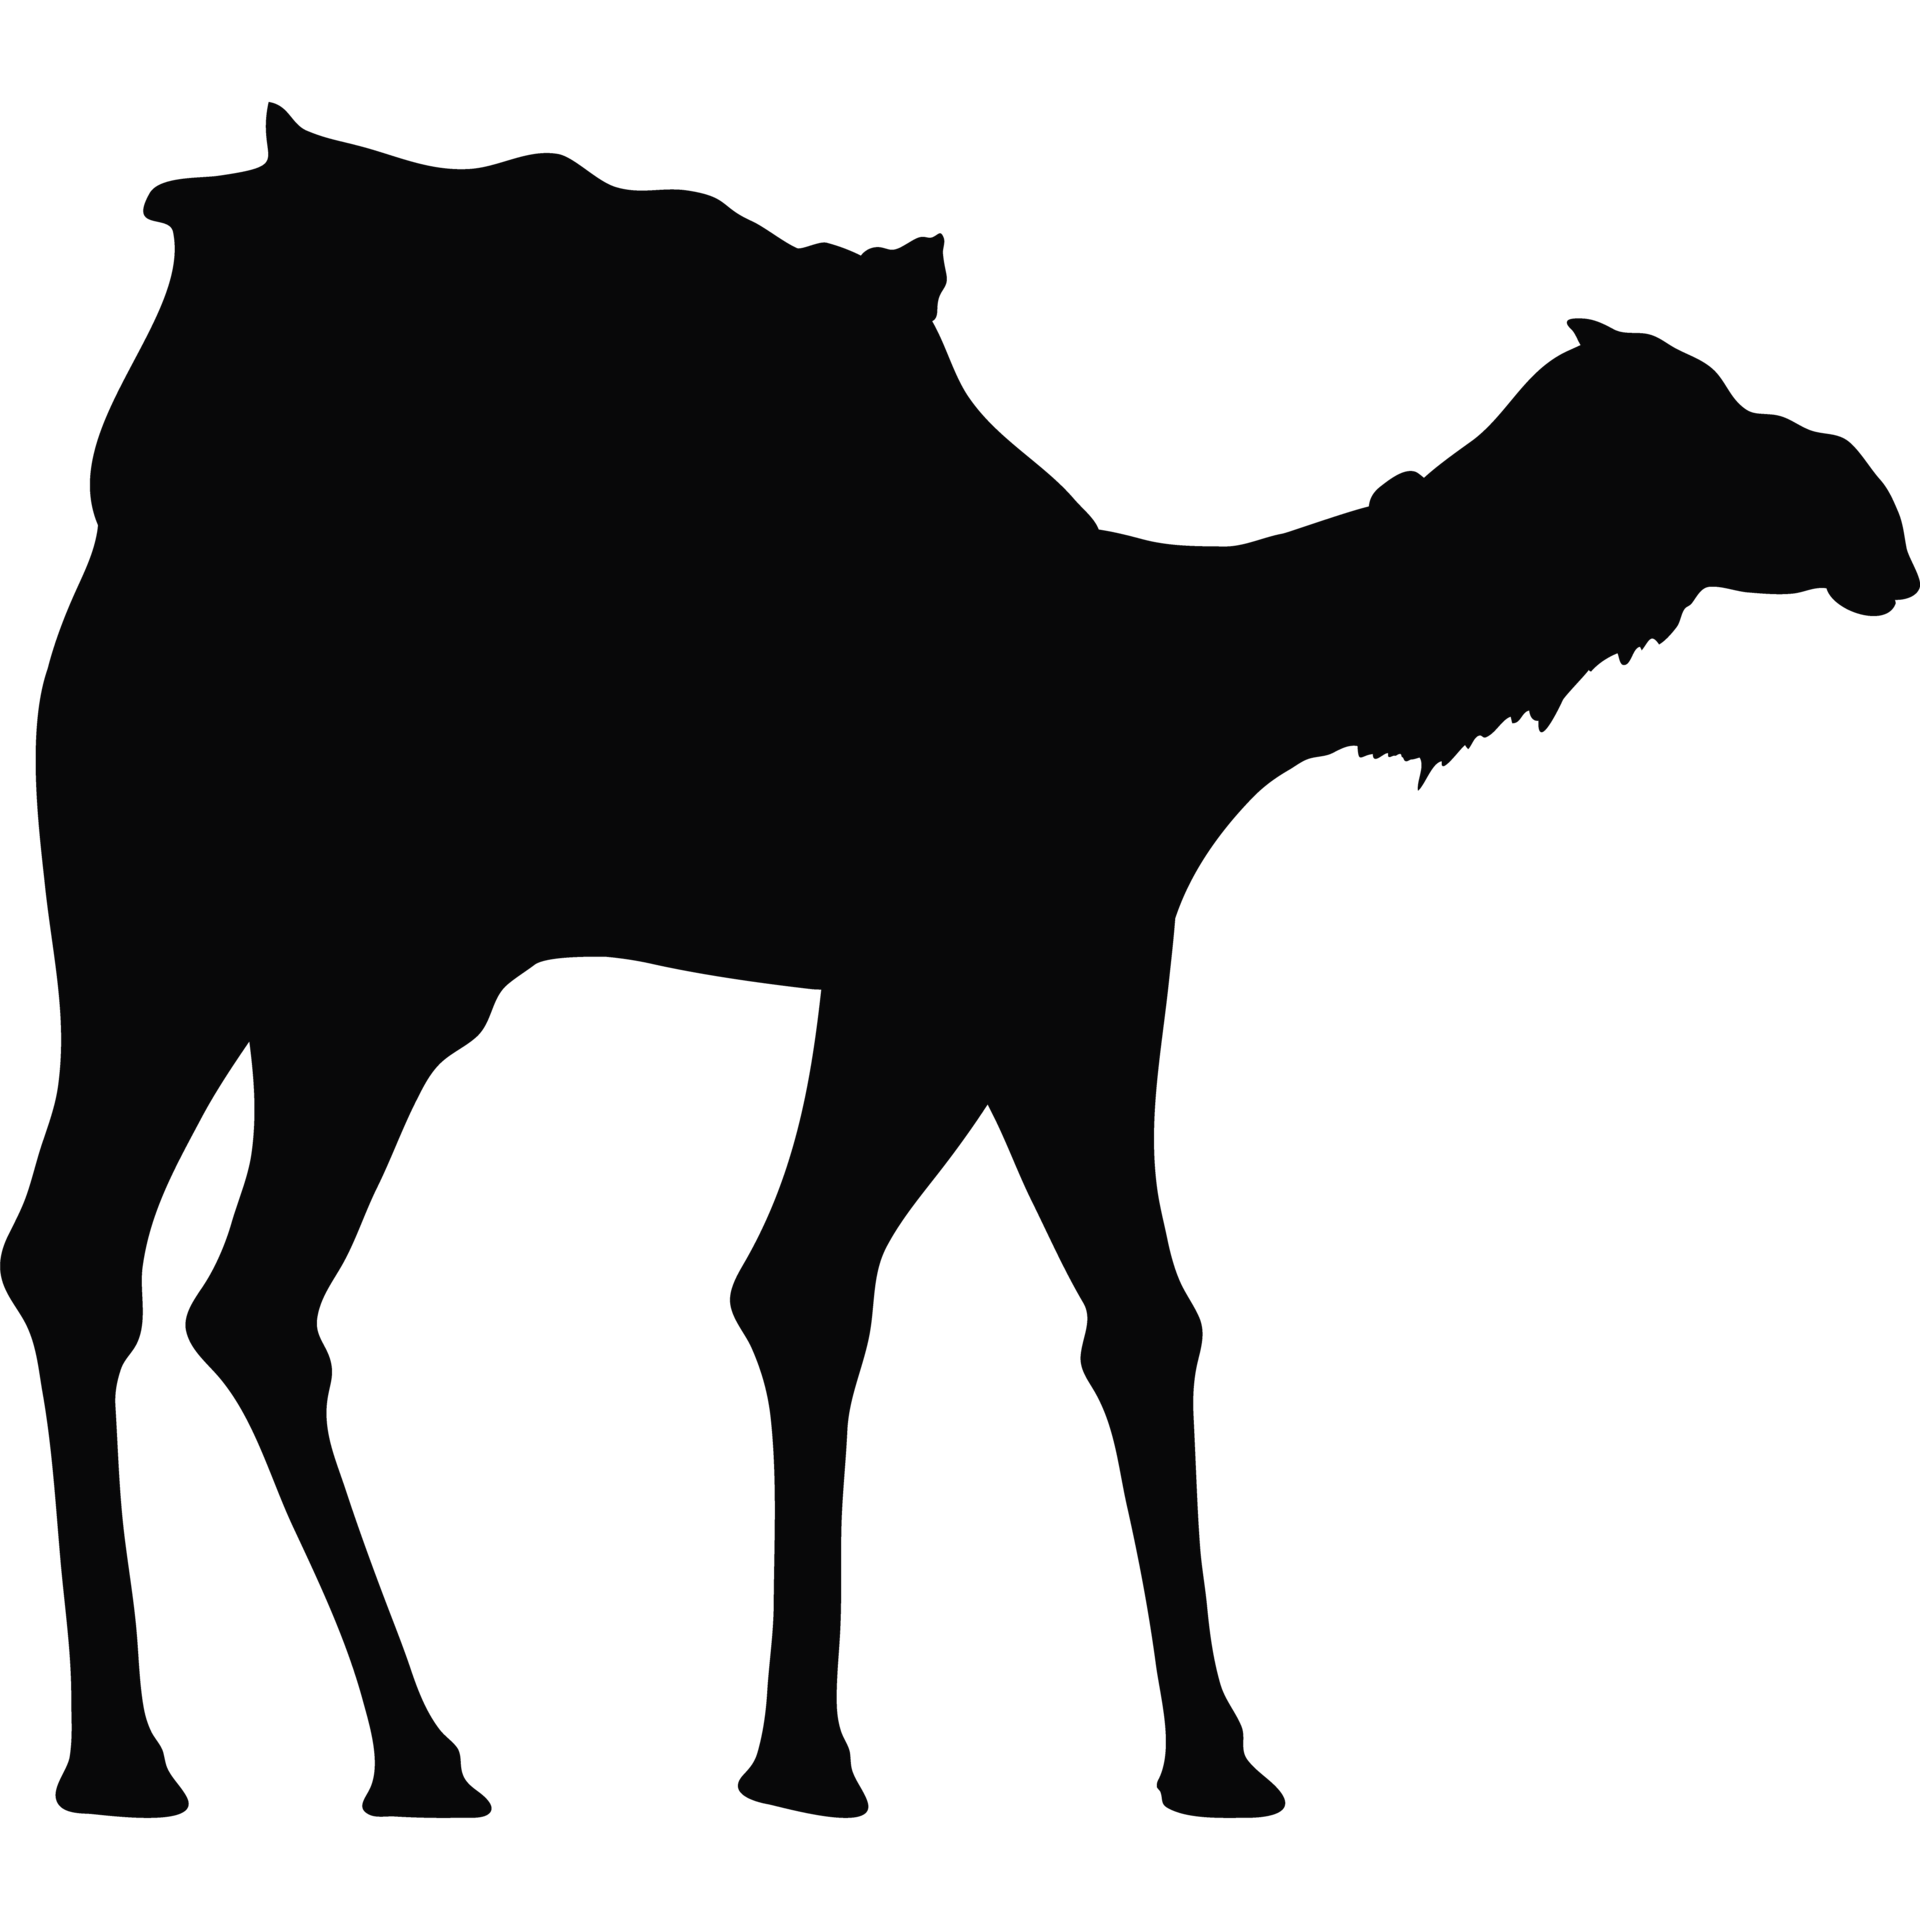 camel animal black silhouette 24090555 PNG